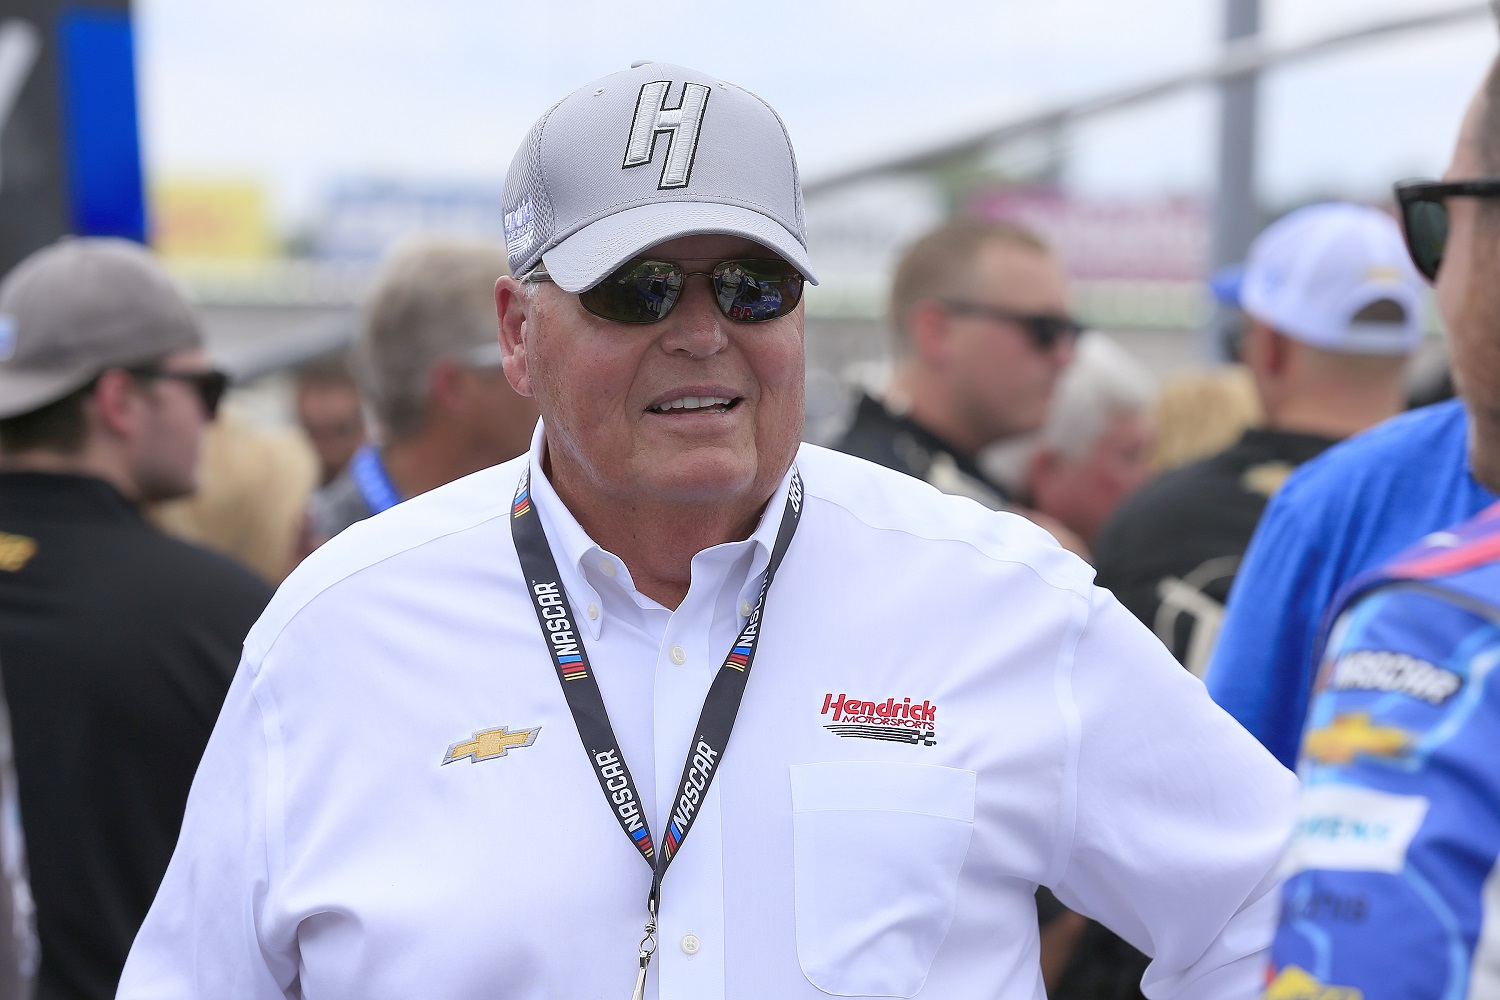 Hendrick Motorsports owner Rick Hendrick looks on before the Quaker State 400 NASCAR race on July 10, 2022, at the Atlanta Motor Speedway in Hampton, Georgia. | David J. Griffin/Icon Sportswire via Getty Images